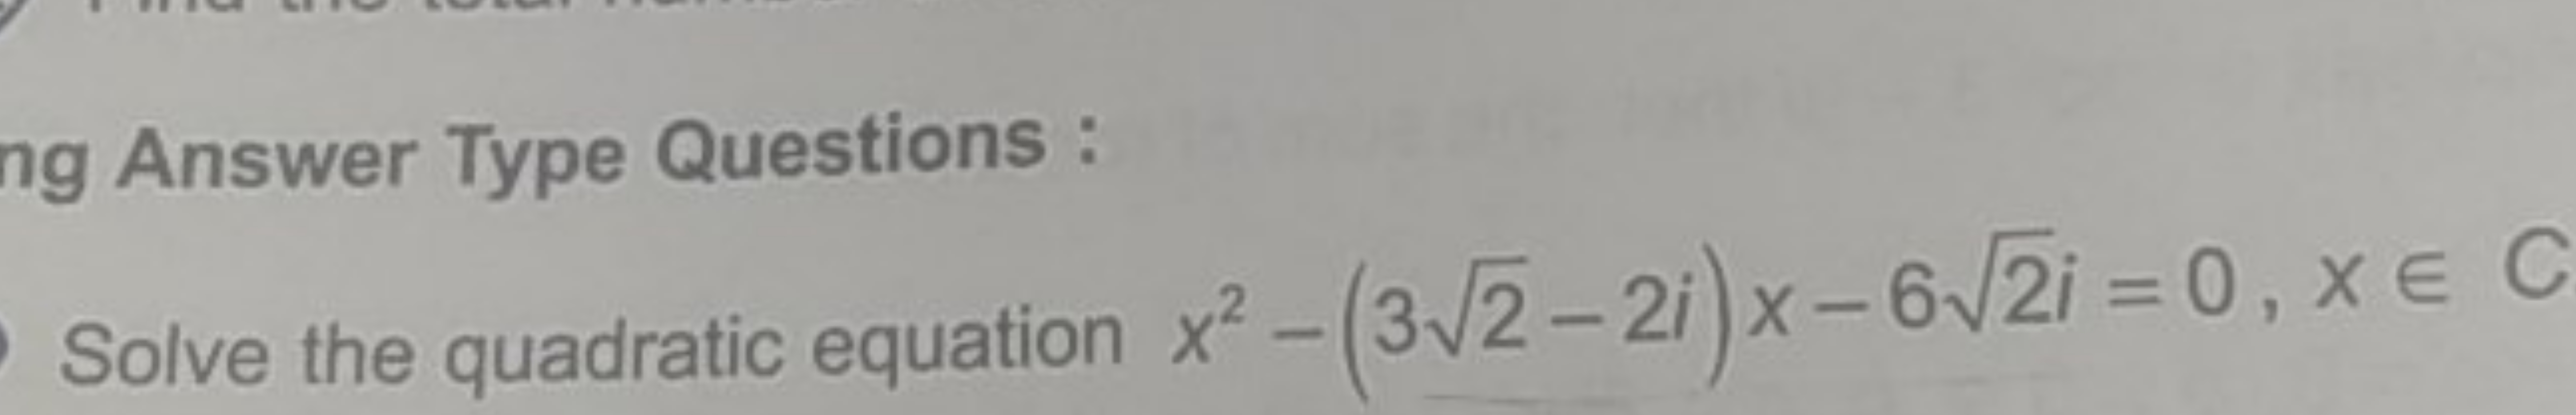 ng Answer Type Questions :
Solve the quadratic equation x2−(32​−2i)x−6